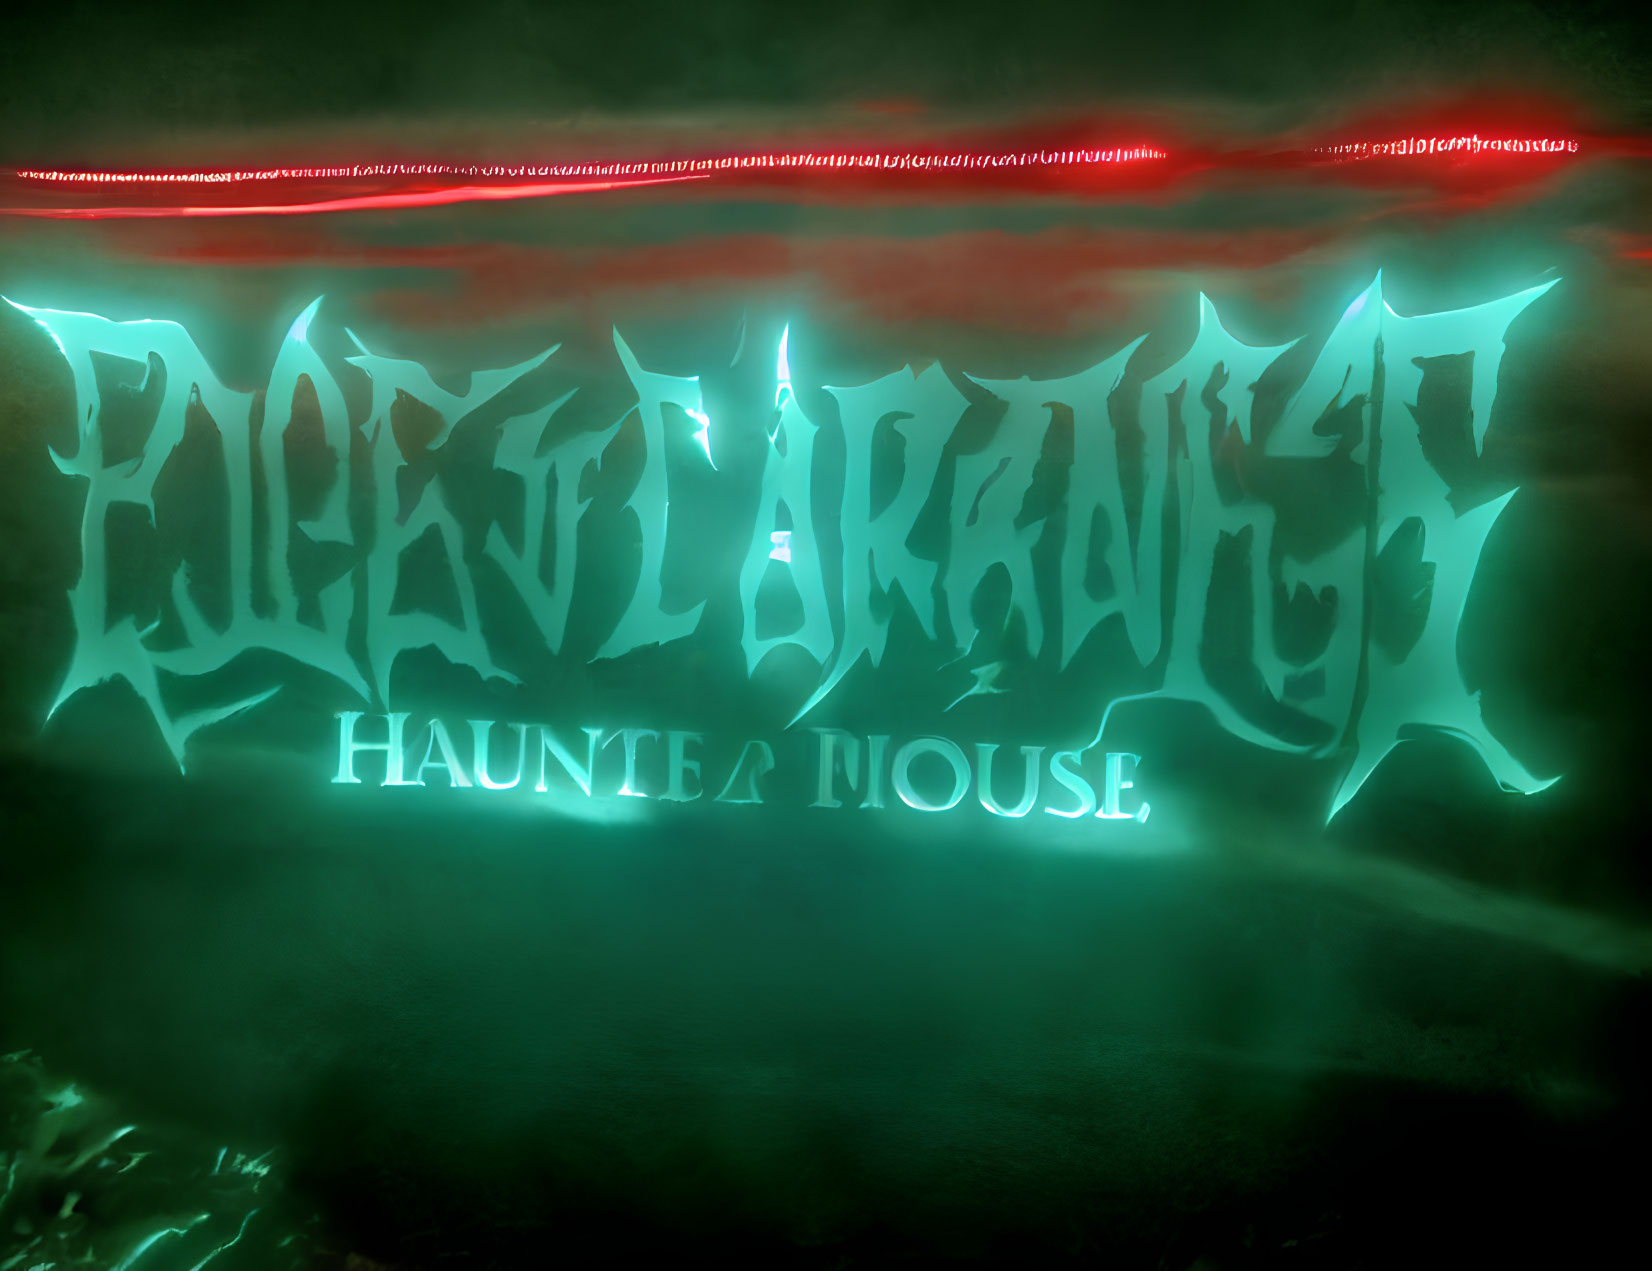 Eerie Green and Red Lighting Surrounding Stylized "Frightmare Haunted House" Sign